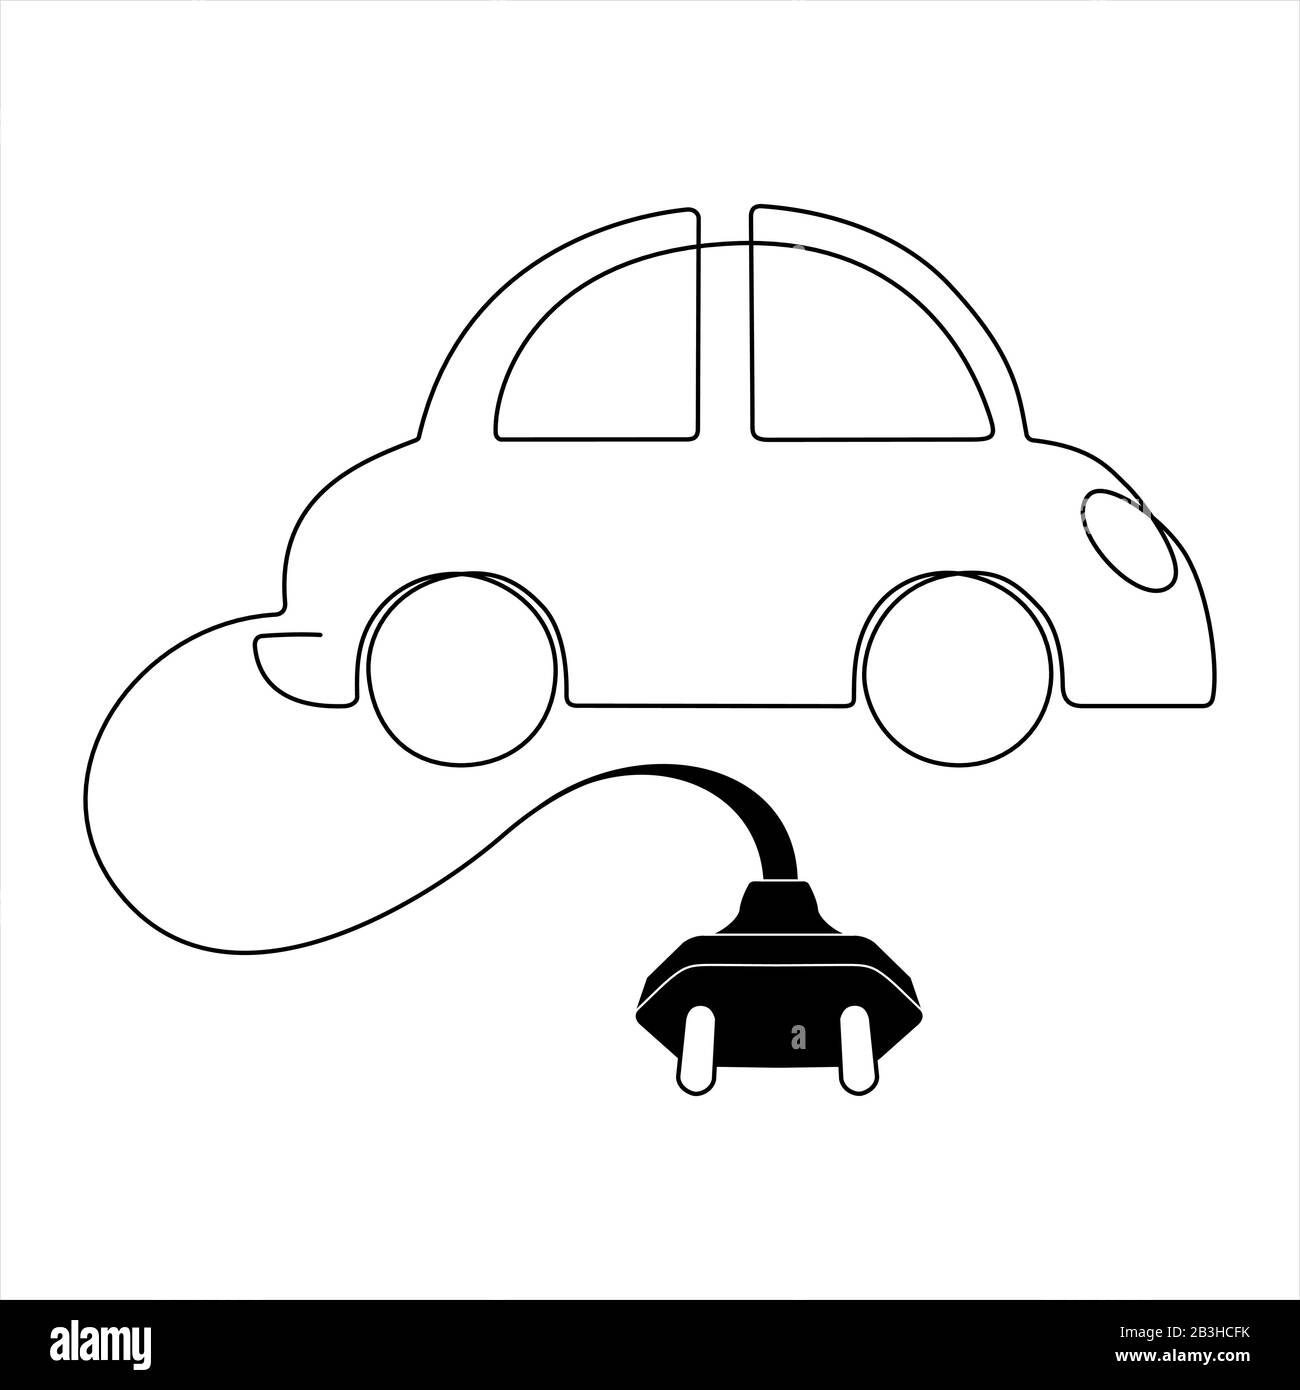 continuous line concept sketch drawing of electric car Stock Vector